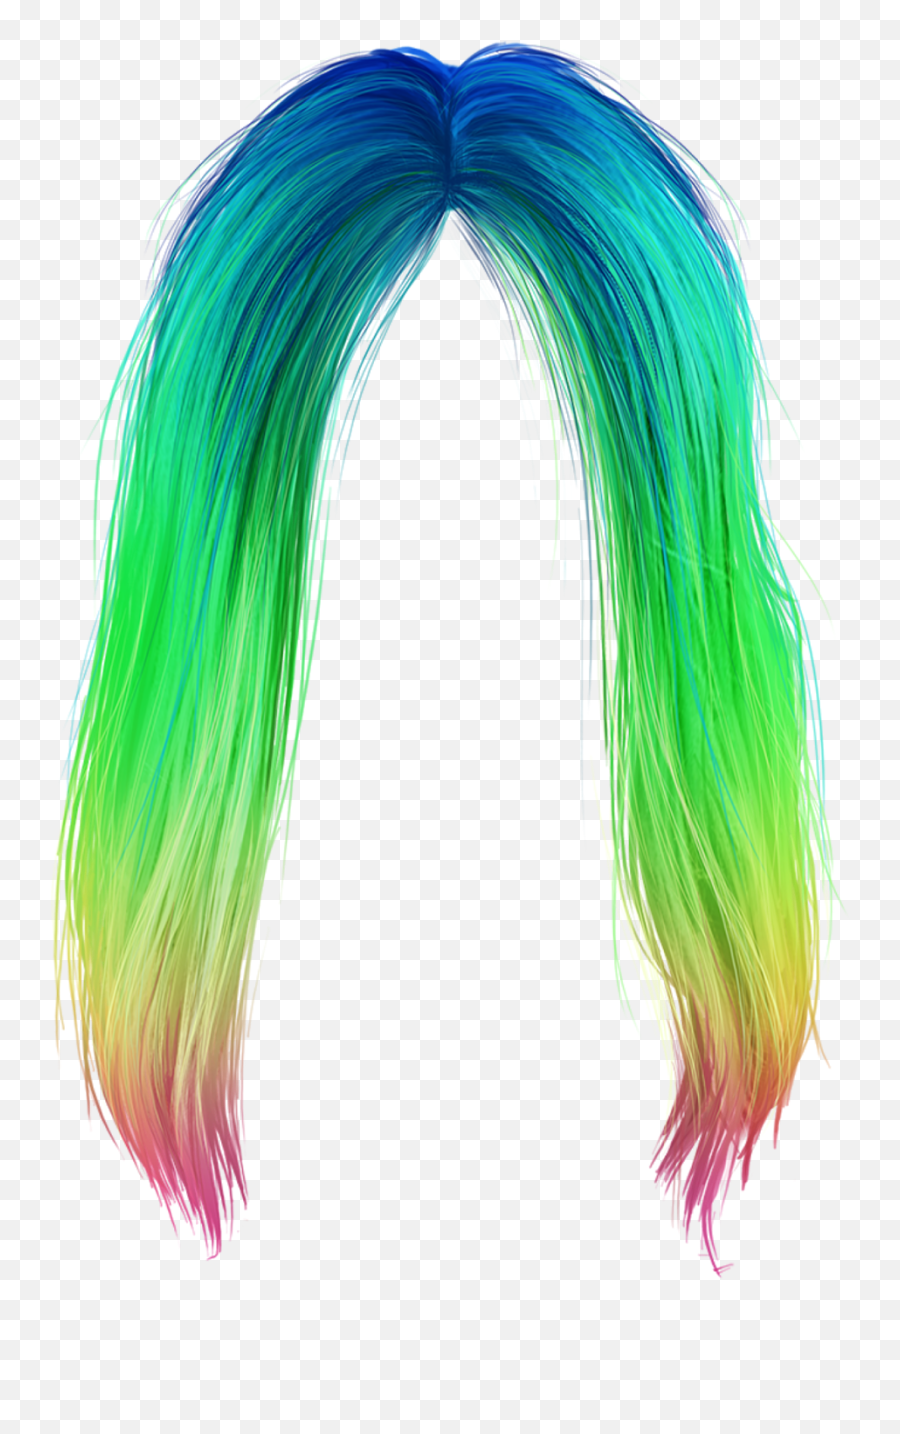 Wig Picsart Hair Studio Dye Touch - Colored Hair Transparent Background Png,Icon Studio For Hair